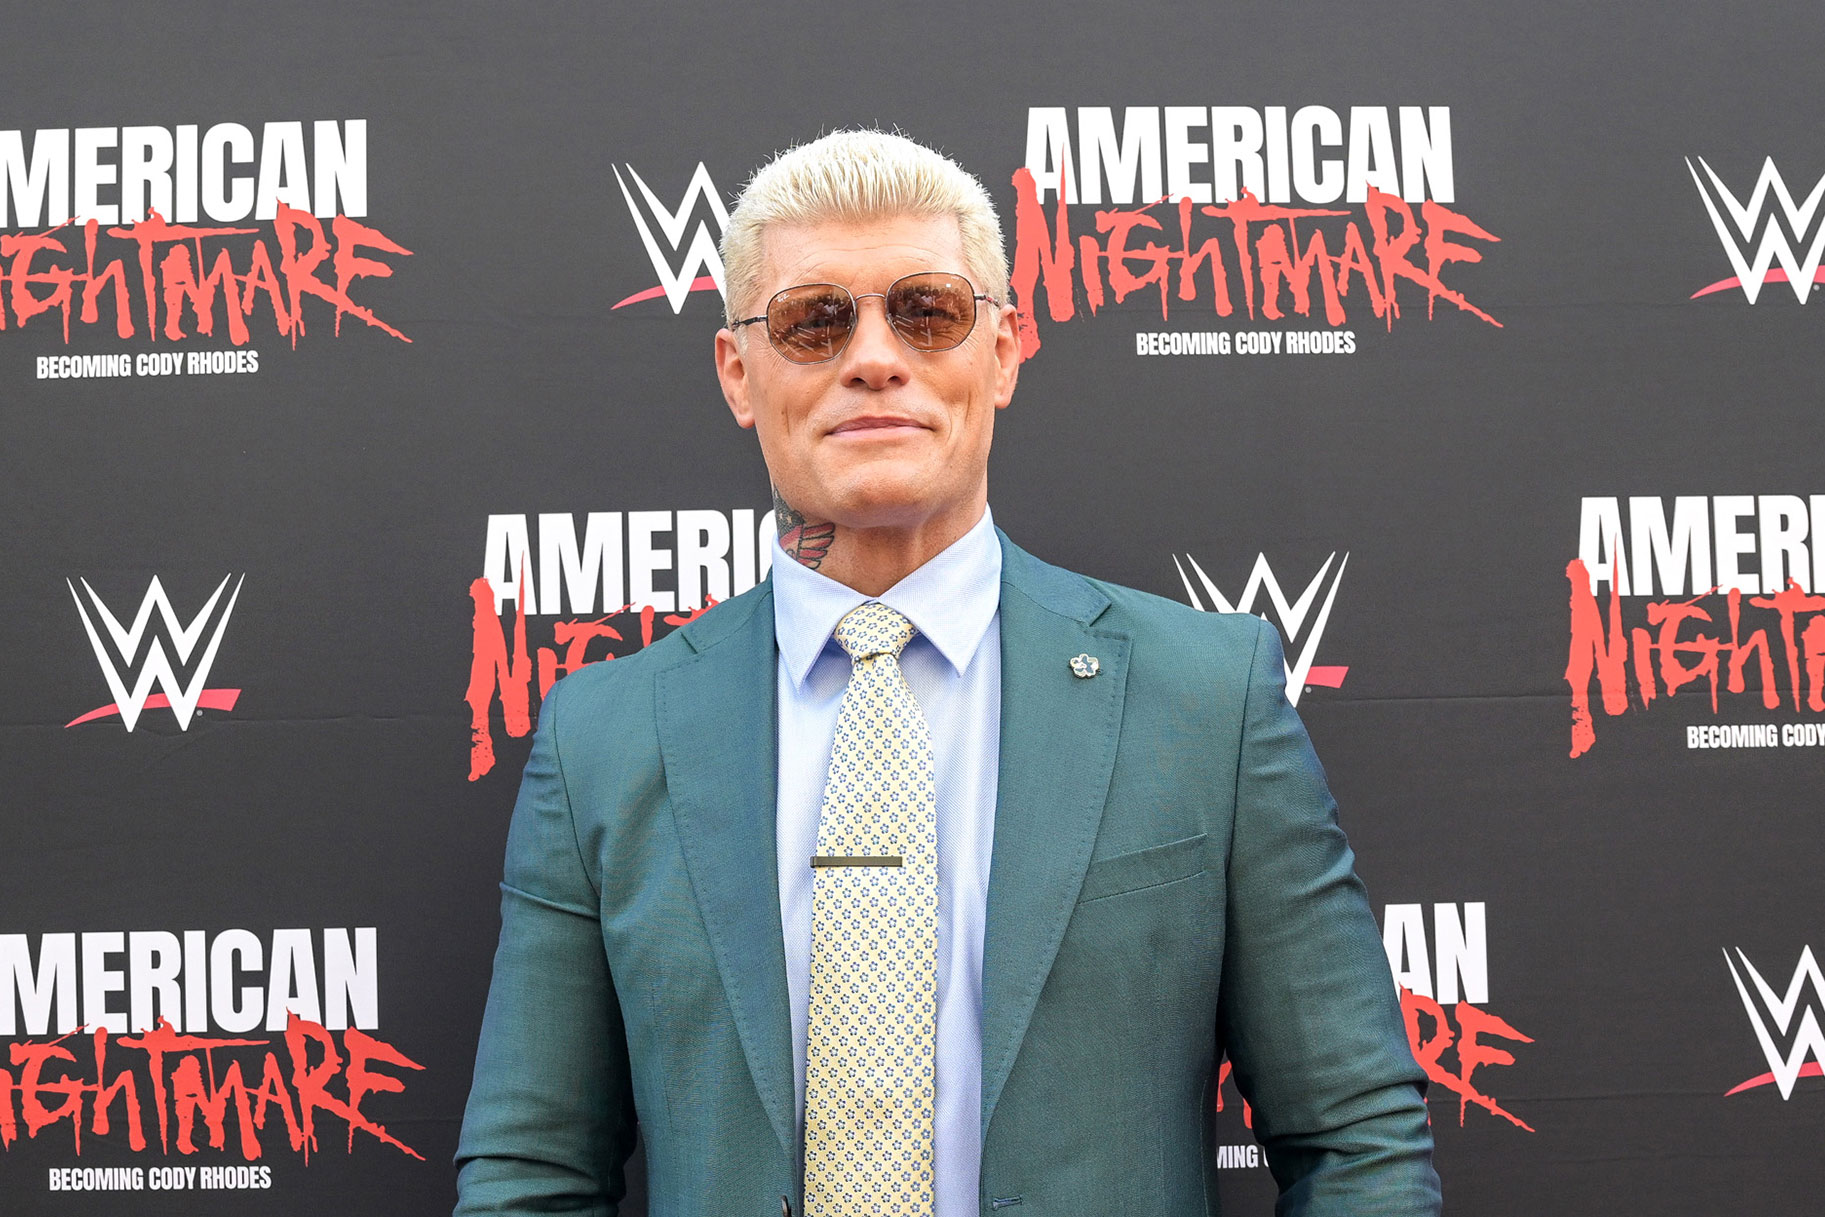 Cody Rhodes poses on the red carpet for the premiere of "American Nightmare: Becoming Cody Rhodes"